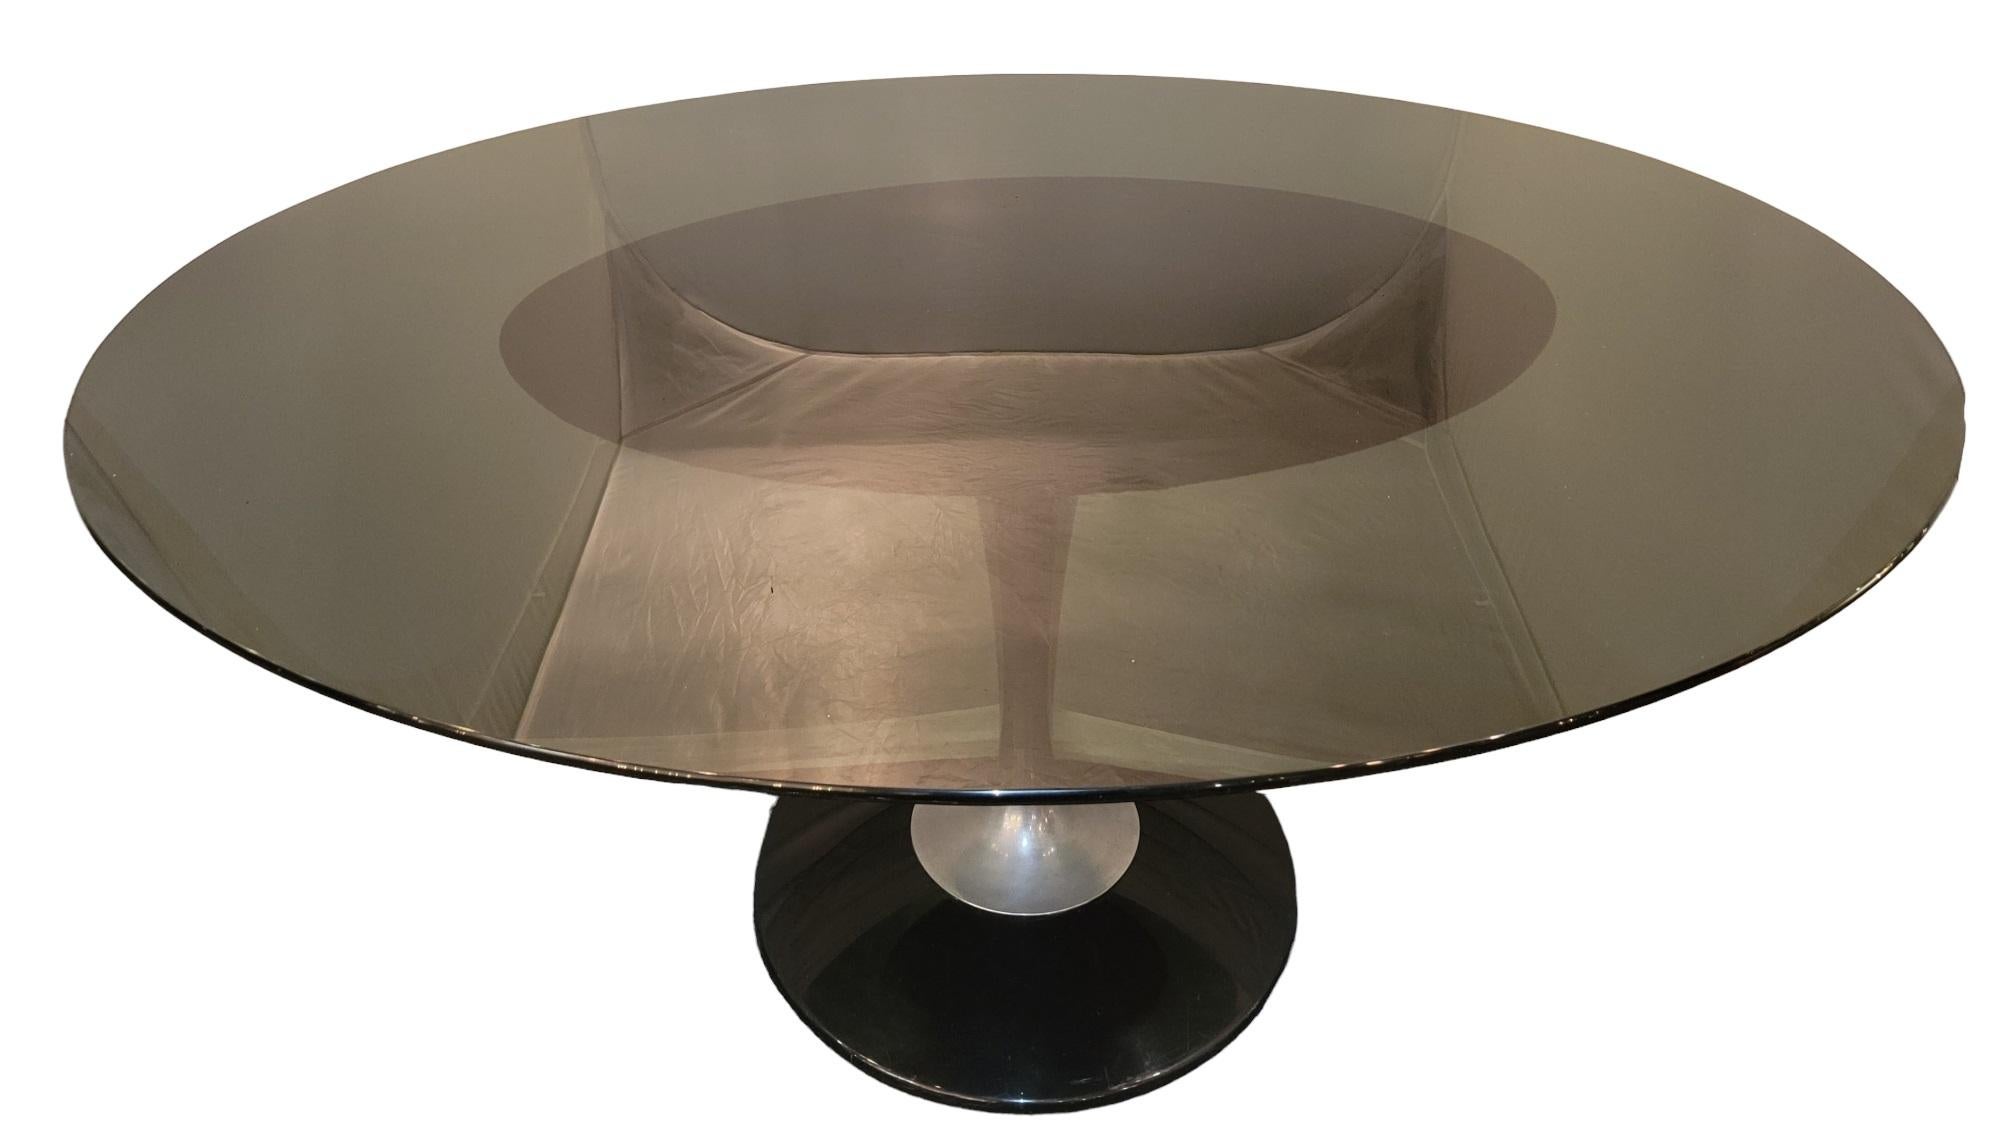 Midcentury glass and metal pedestal dinning/ conference table is a metal base with a leather top for the oval glass top to rests on.
Measures approx - 60w x 46d x 29 high.